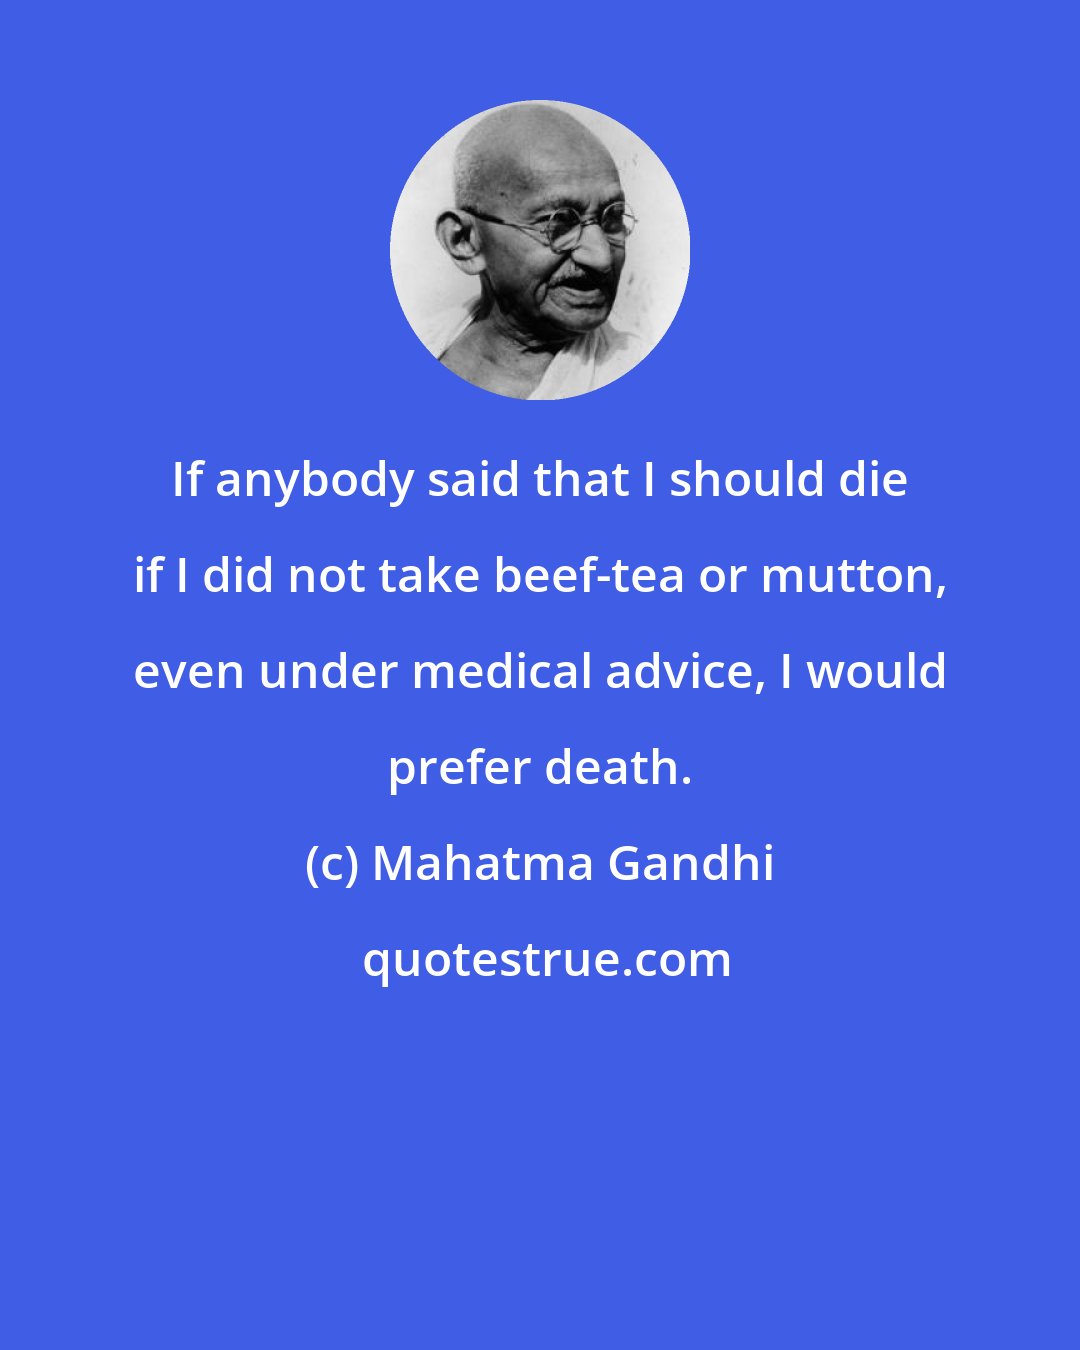 Mahatma Gandhi: If anybody said that I should die if I did not take beef-tea or mutton, even under medical advice, I would prefer death.